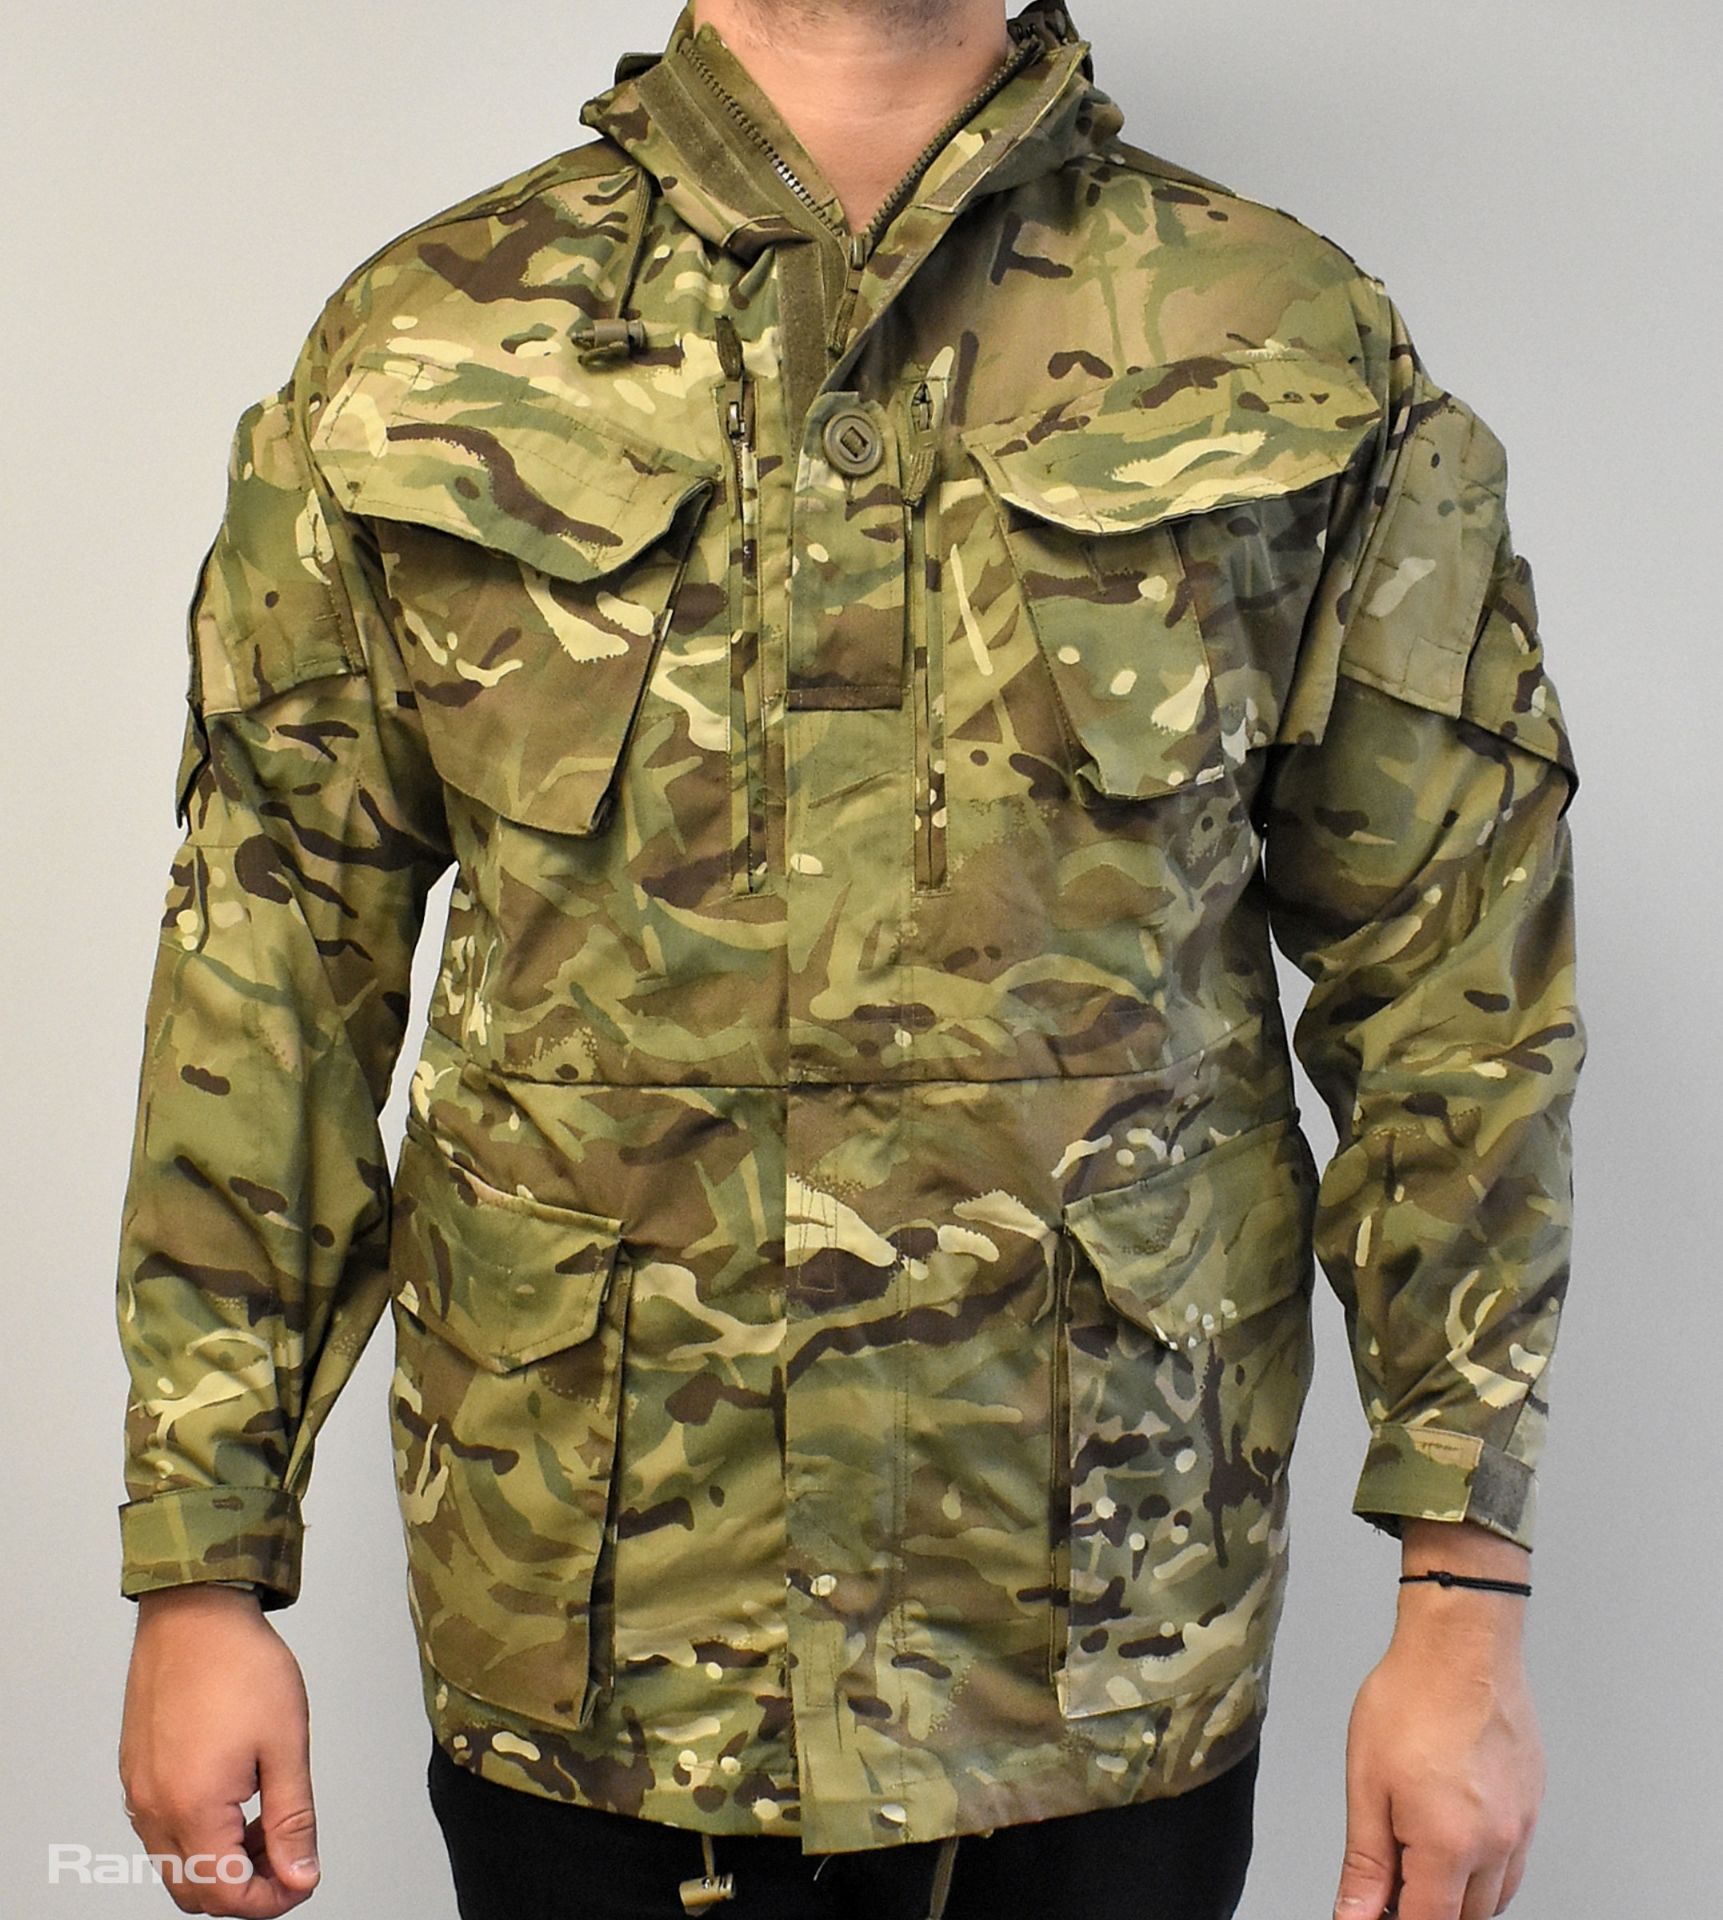 60x British Army MTP combat smocks 2 windproof - mixed grades and sizes